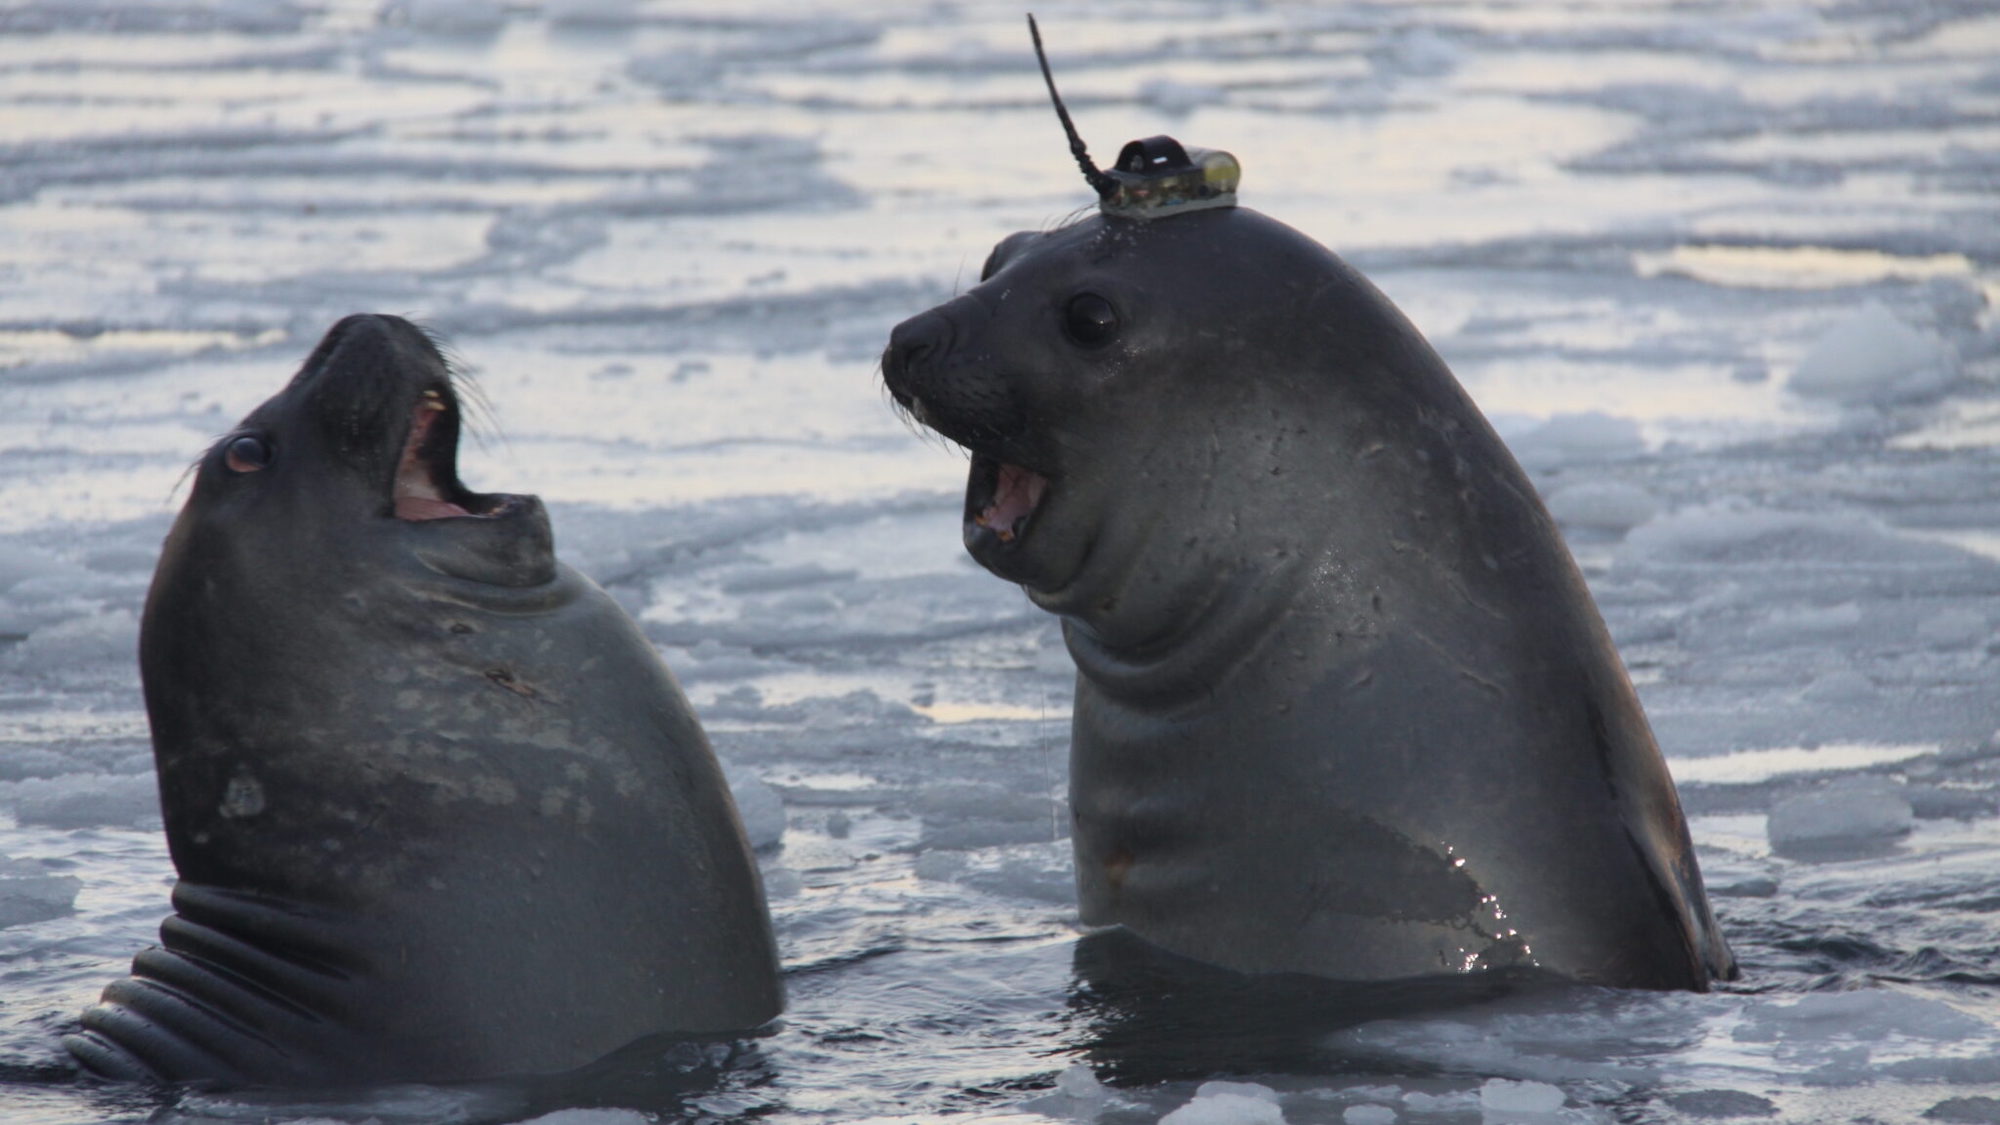 Seals with funny hats are helping map the Antarctic seascape